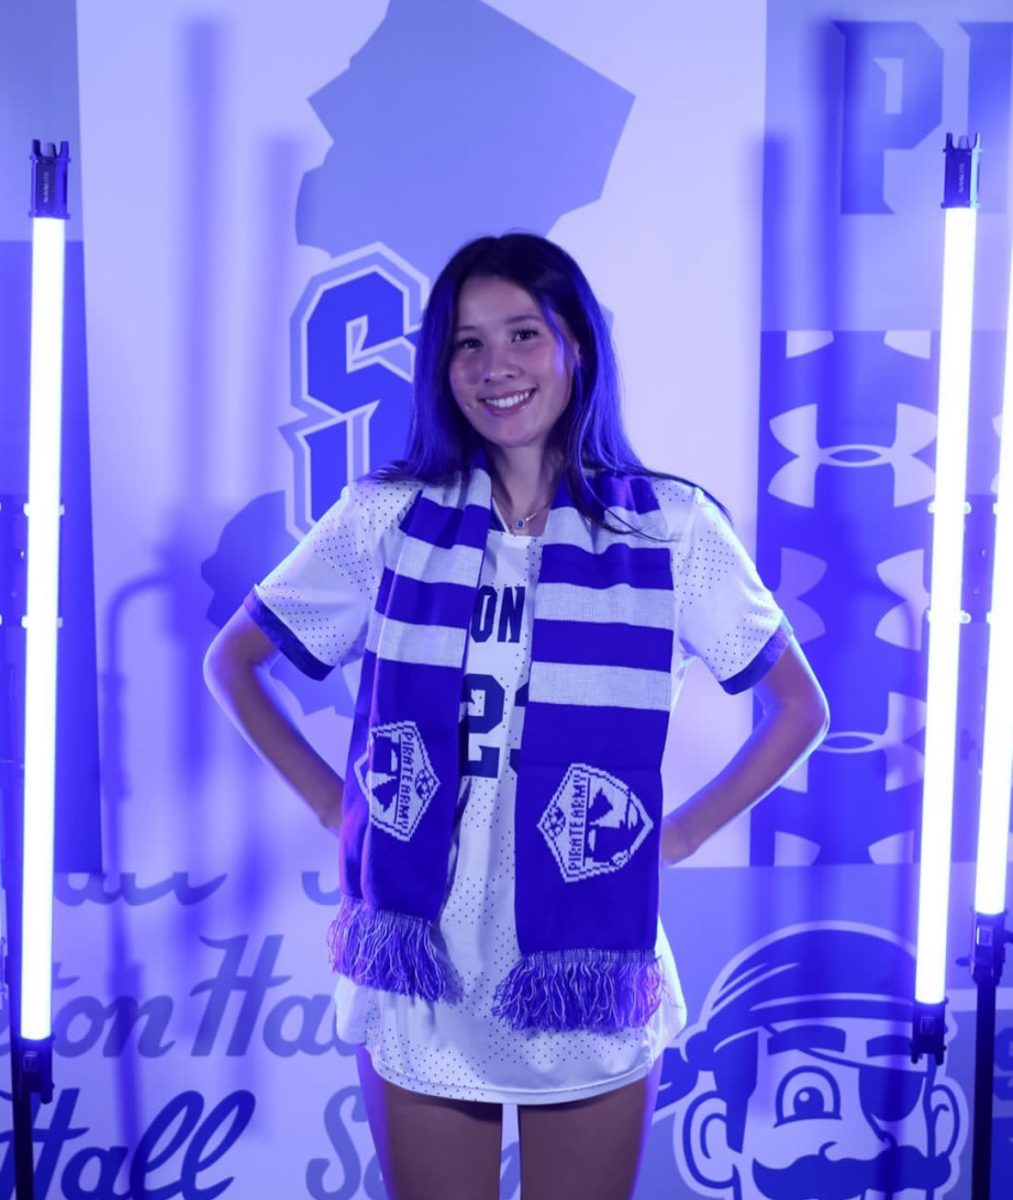 Skyler Thompson after committing to play Soccer at Seton Hall University!